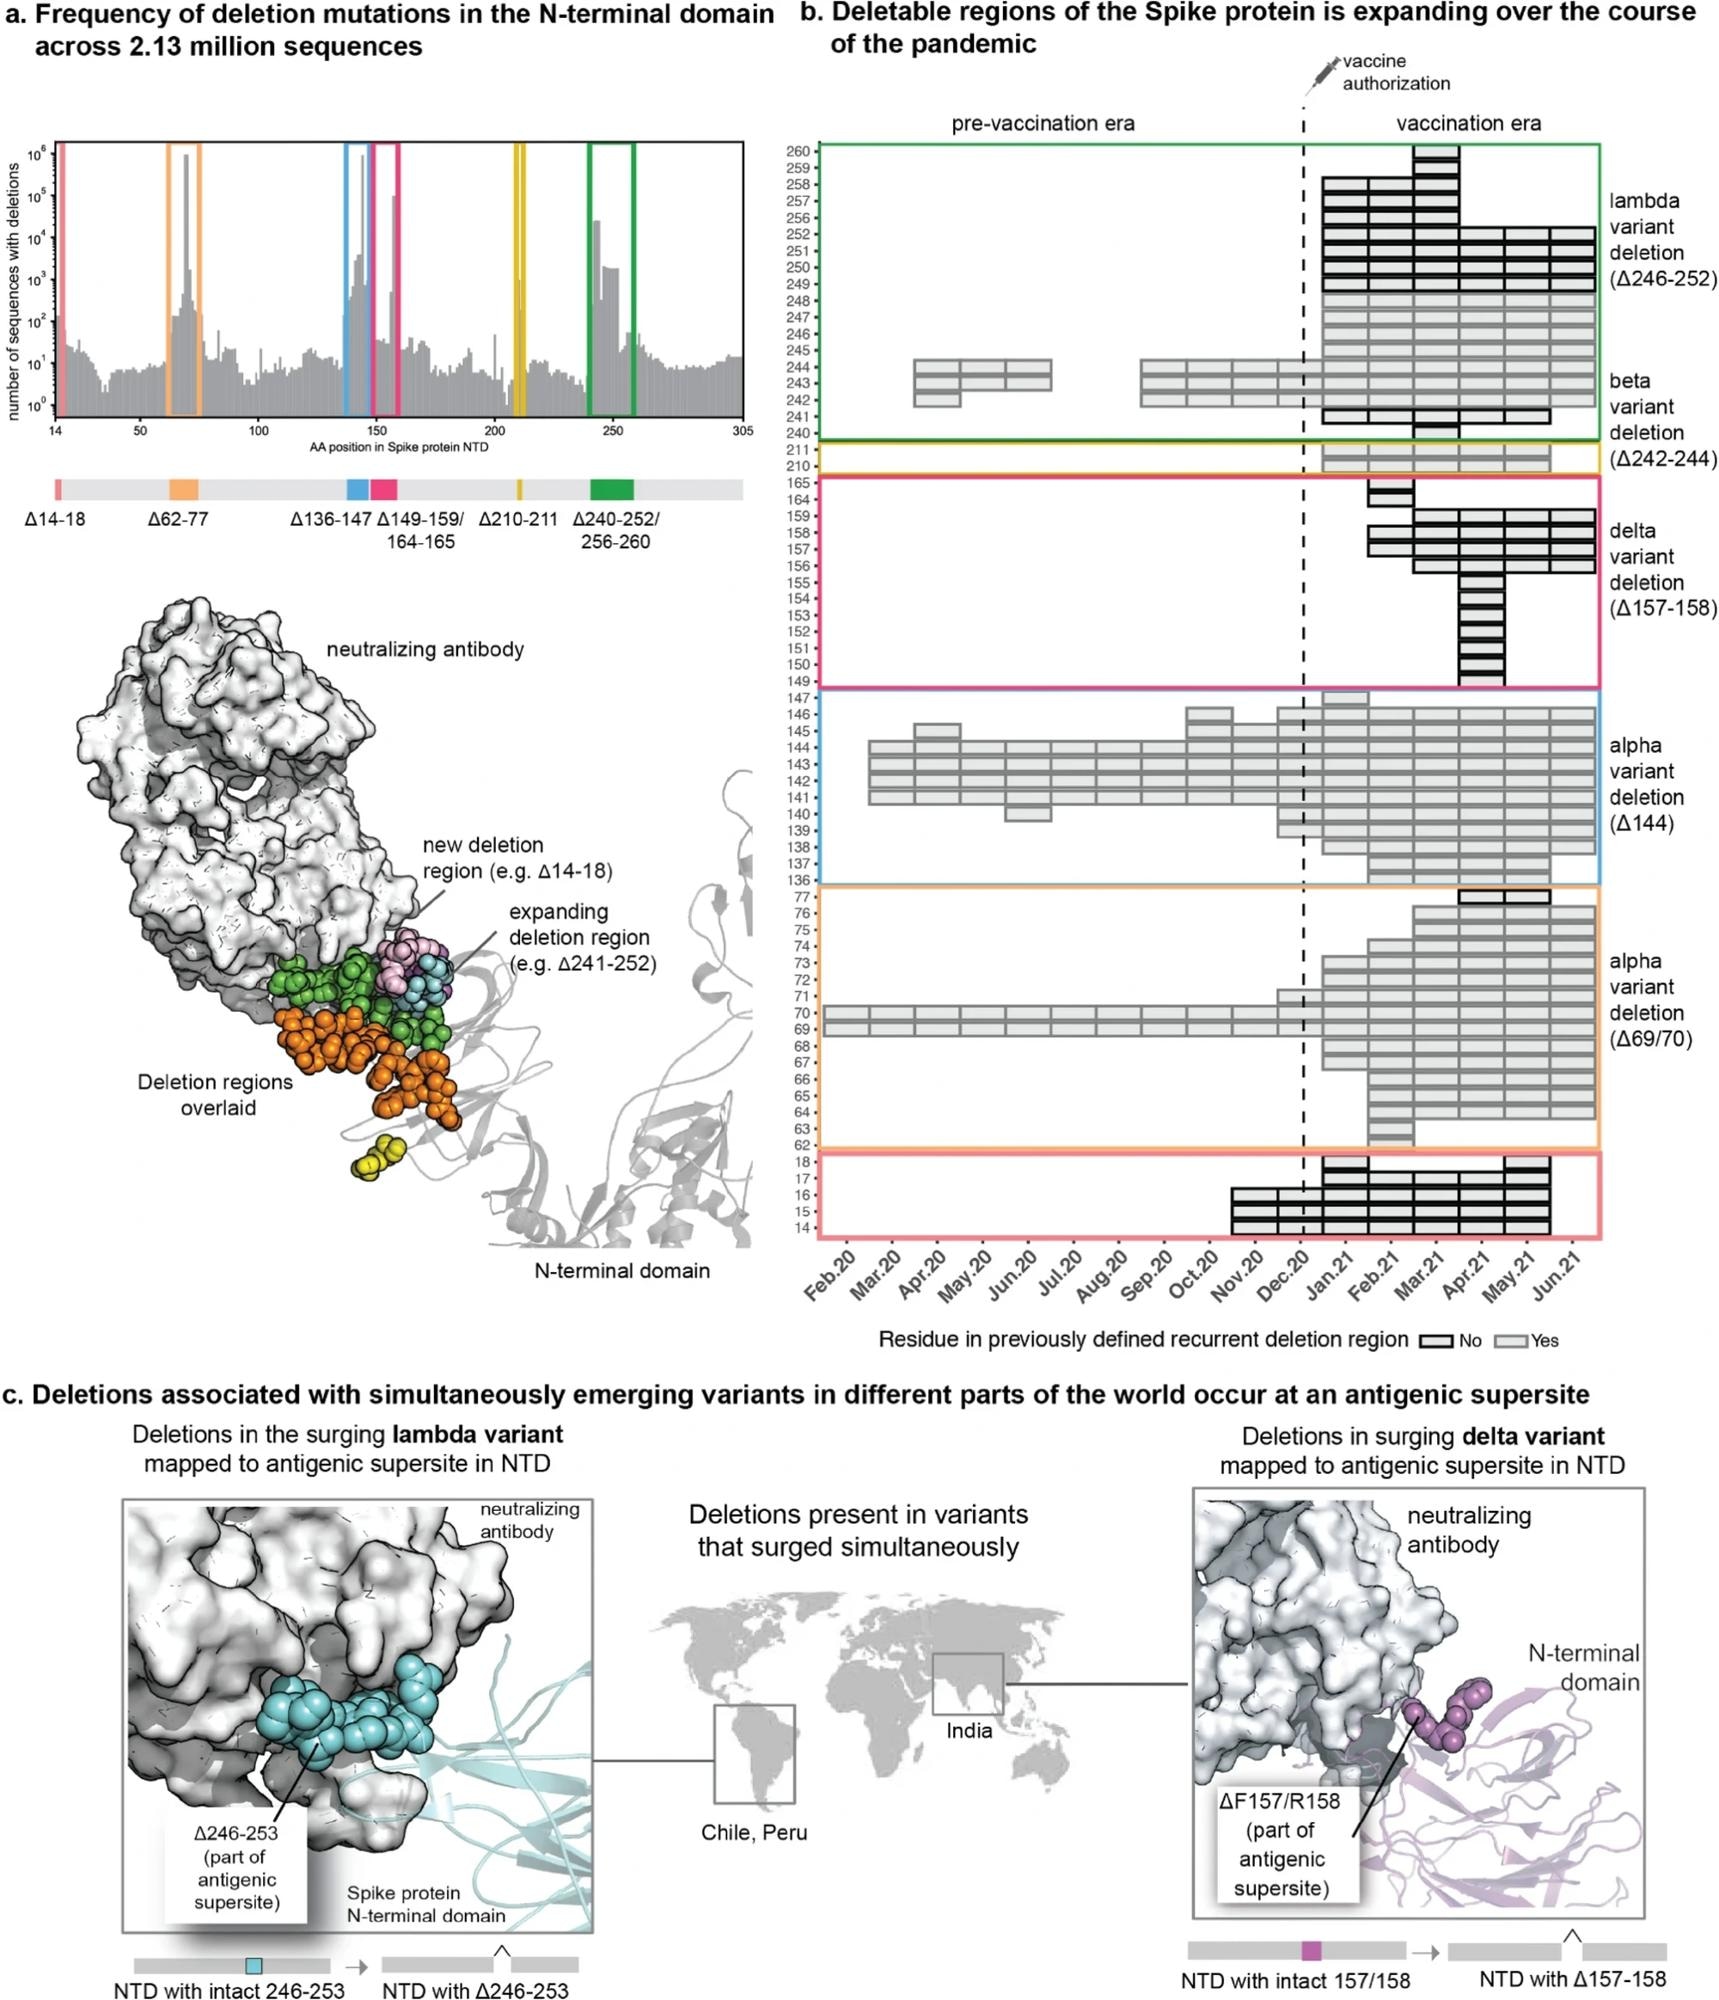 The repertoire of deletions in the spike protein N-terminal domain is expanding throughout the pandemic.  (a) Frequency of occurrence of deletion mutations in the N-terminal domain in 2.13 million Spike protein sequences (as of June 30, 2021).  Both known and novel repetitive deletion sites are schematically shown and mapped onto the structure of the Spike protein.  Positions corresponding to deletion mutations in the spike protein are shown as colored spheres and the neutralizing antibody is indicated using a gray surface representation.  (b) During the pandemic 